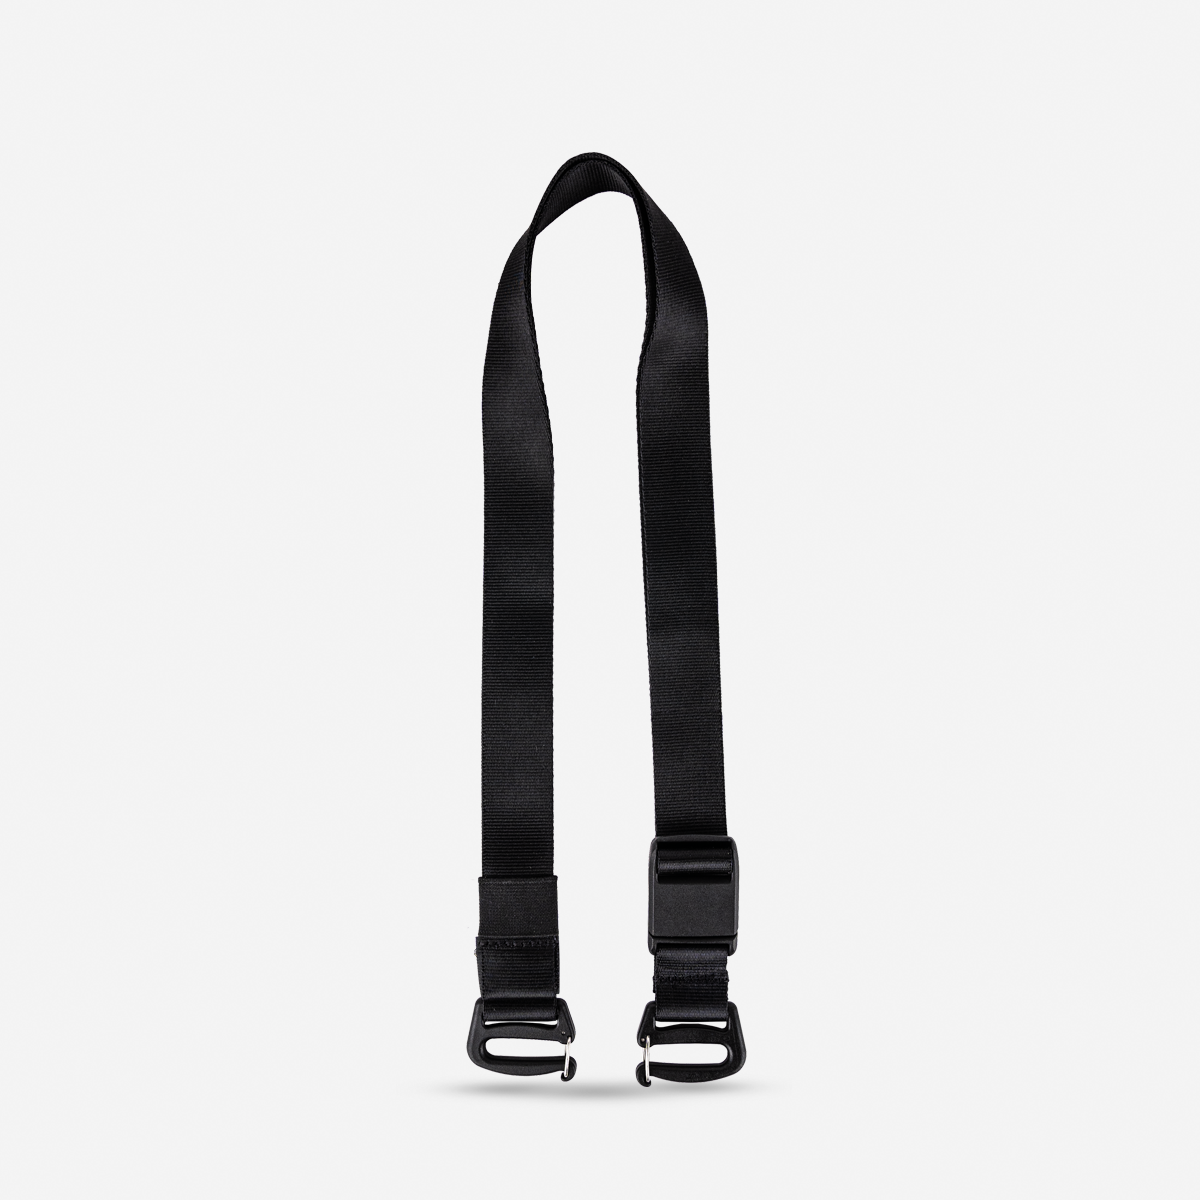 Carry Strap for Wandrd Tech Bag/Toiletry Bag - Storming Gravity